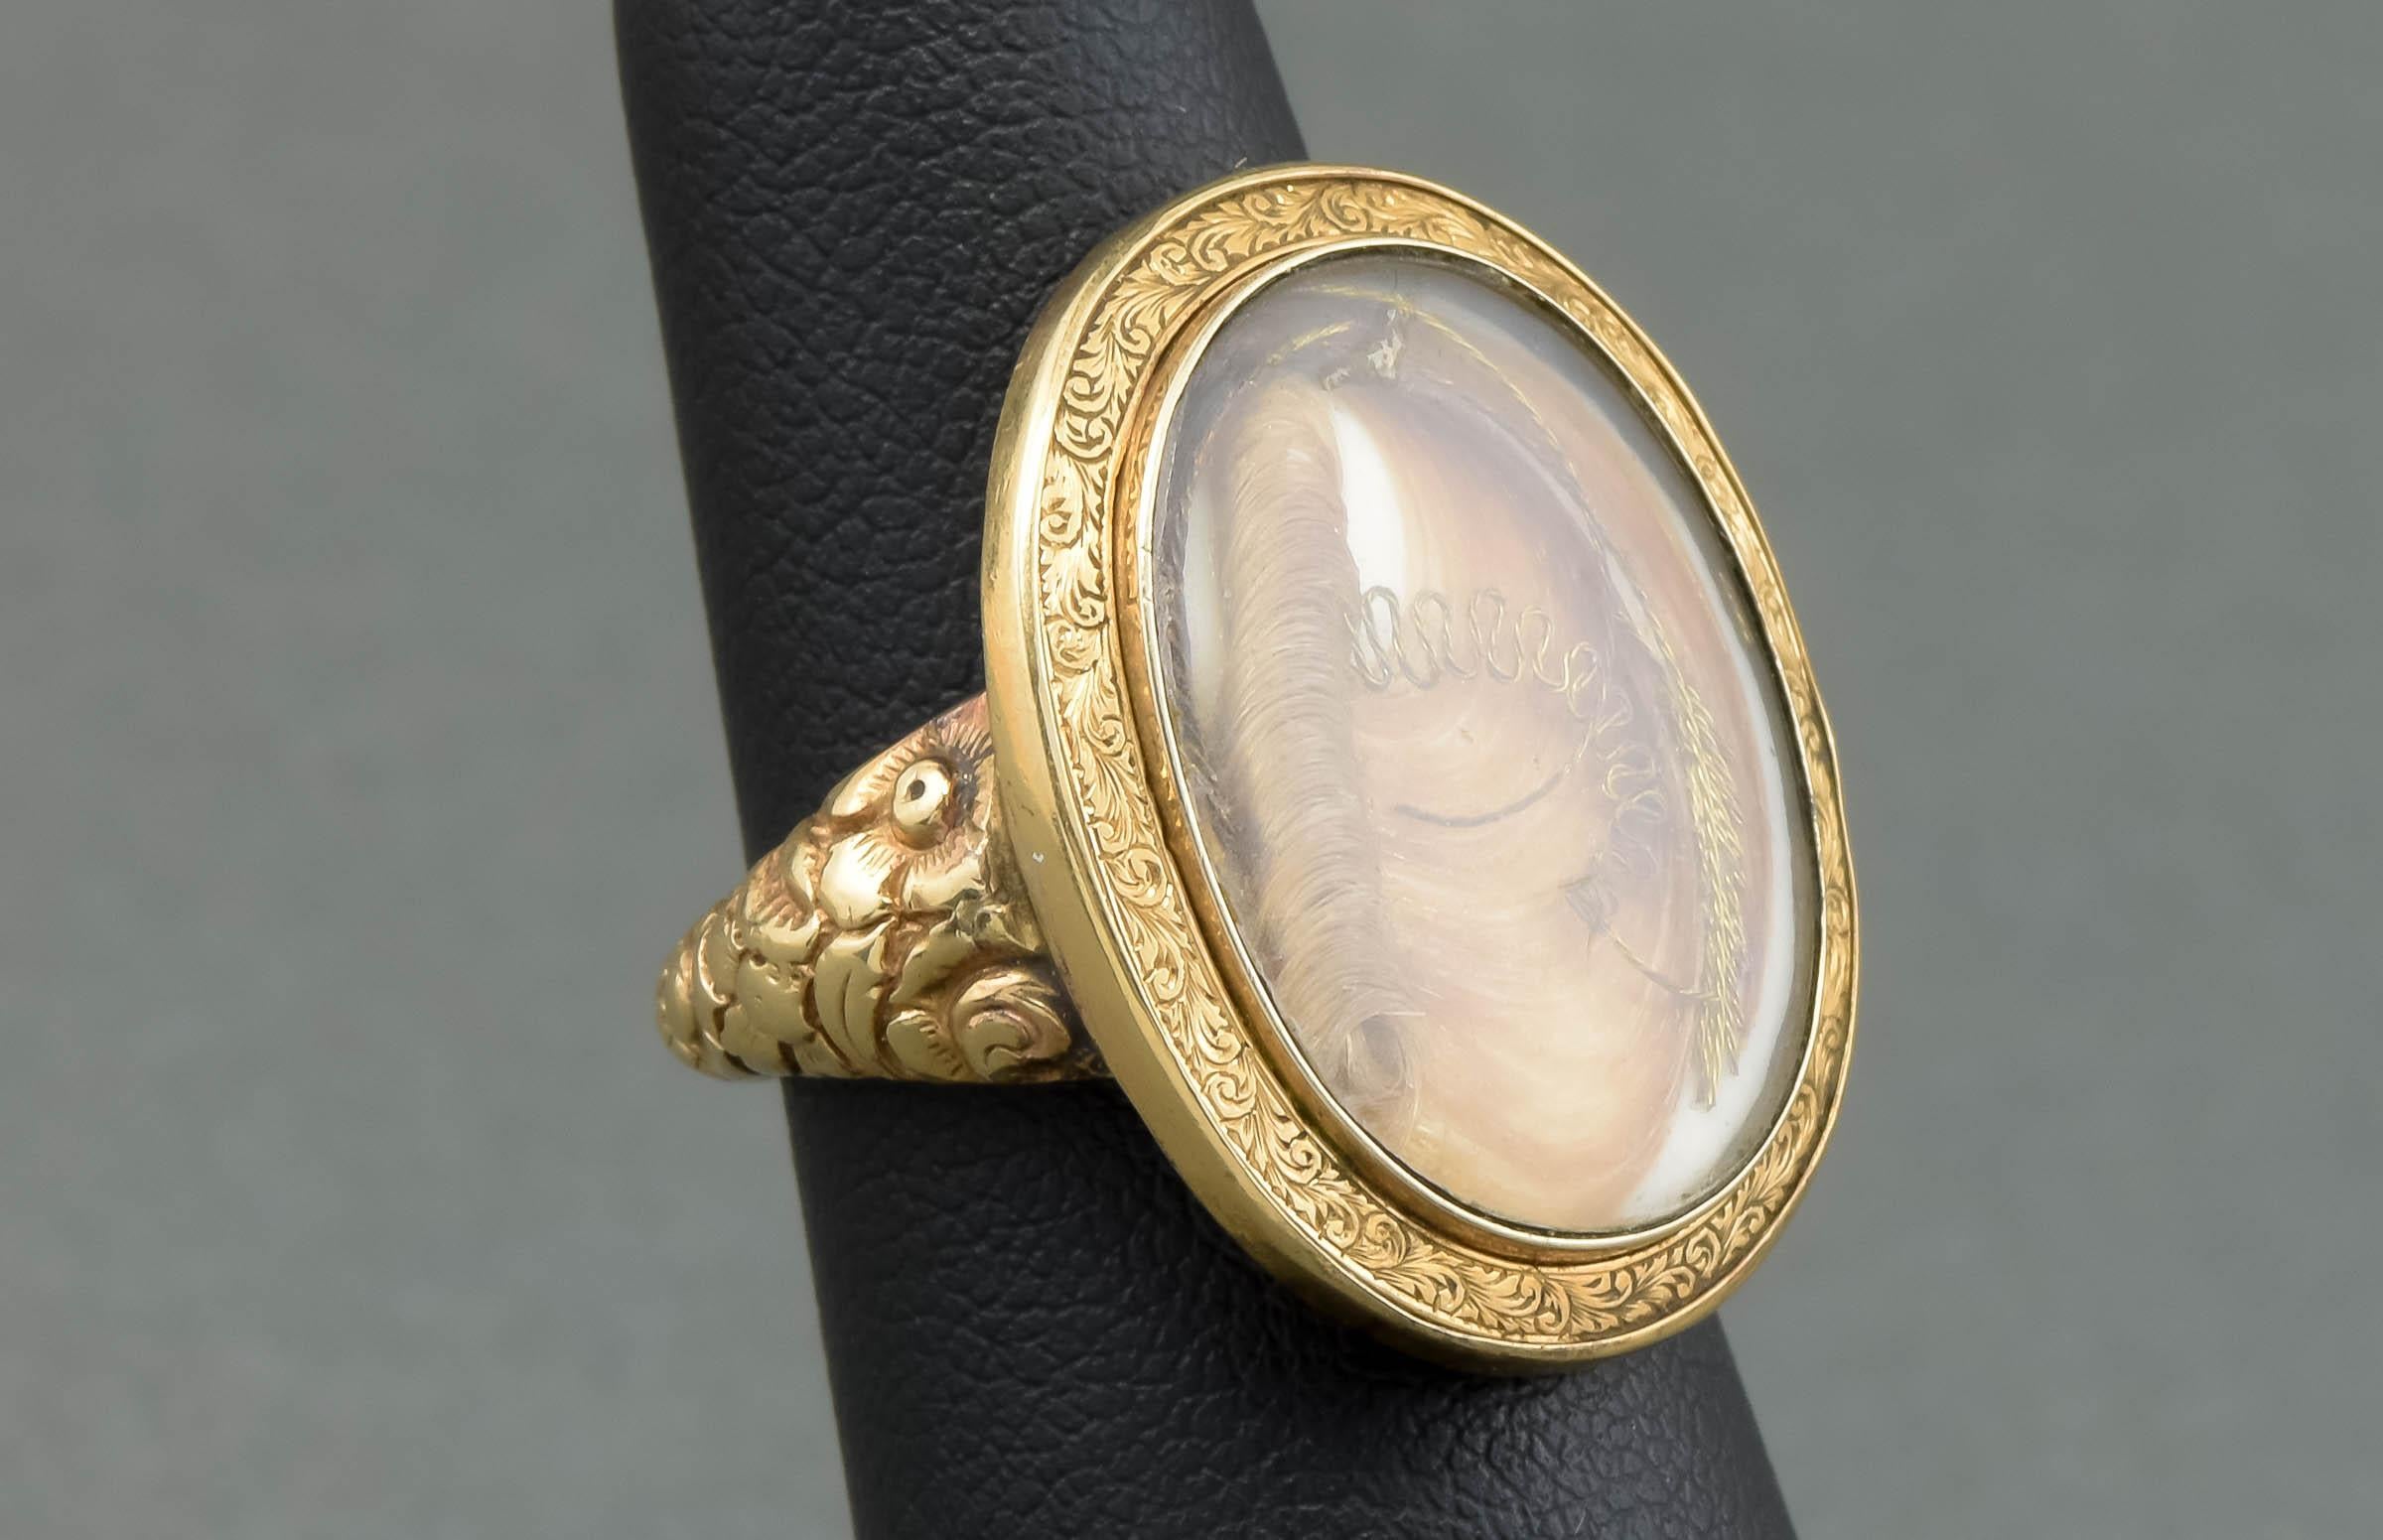 Dating to 1860, this lovely Victorian hair work ring was likely once a sentimental or mourning brooch or pendant. At some point in the Victorian period it was converted into the lovely ring it is now.

Crafted of gold testing between 10K and 14K,